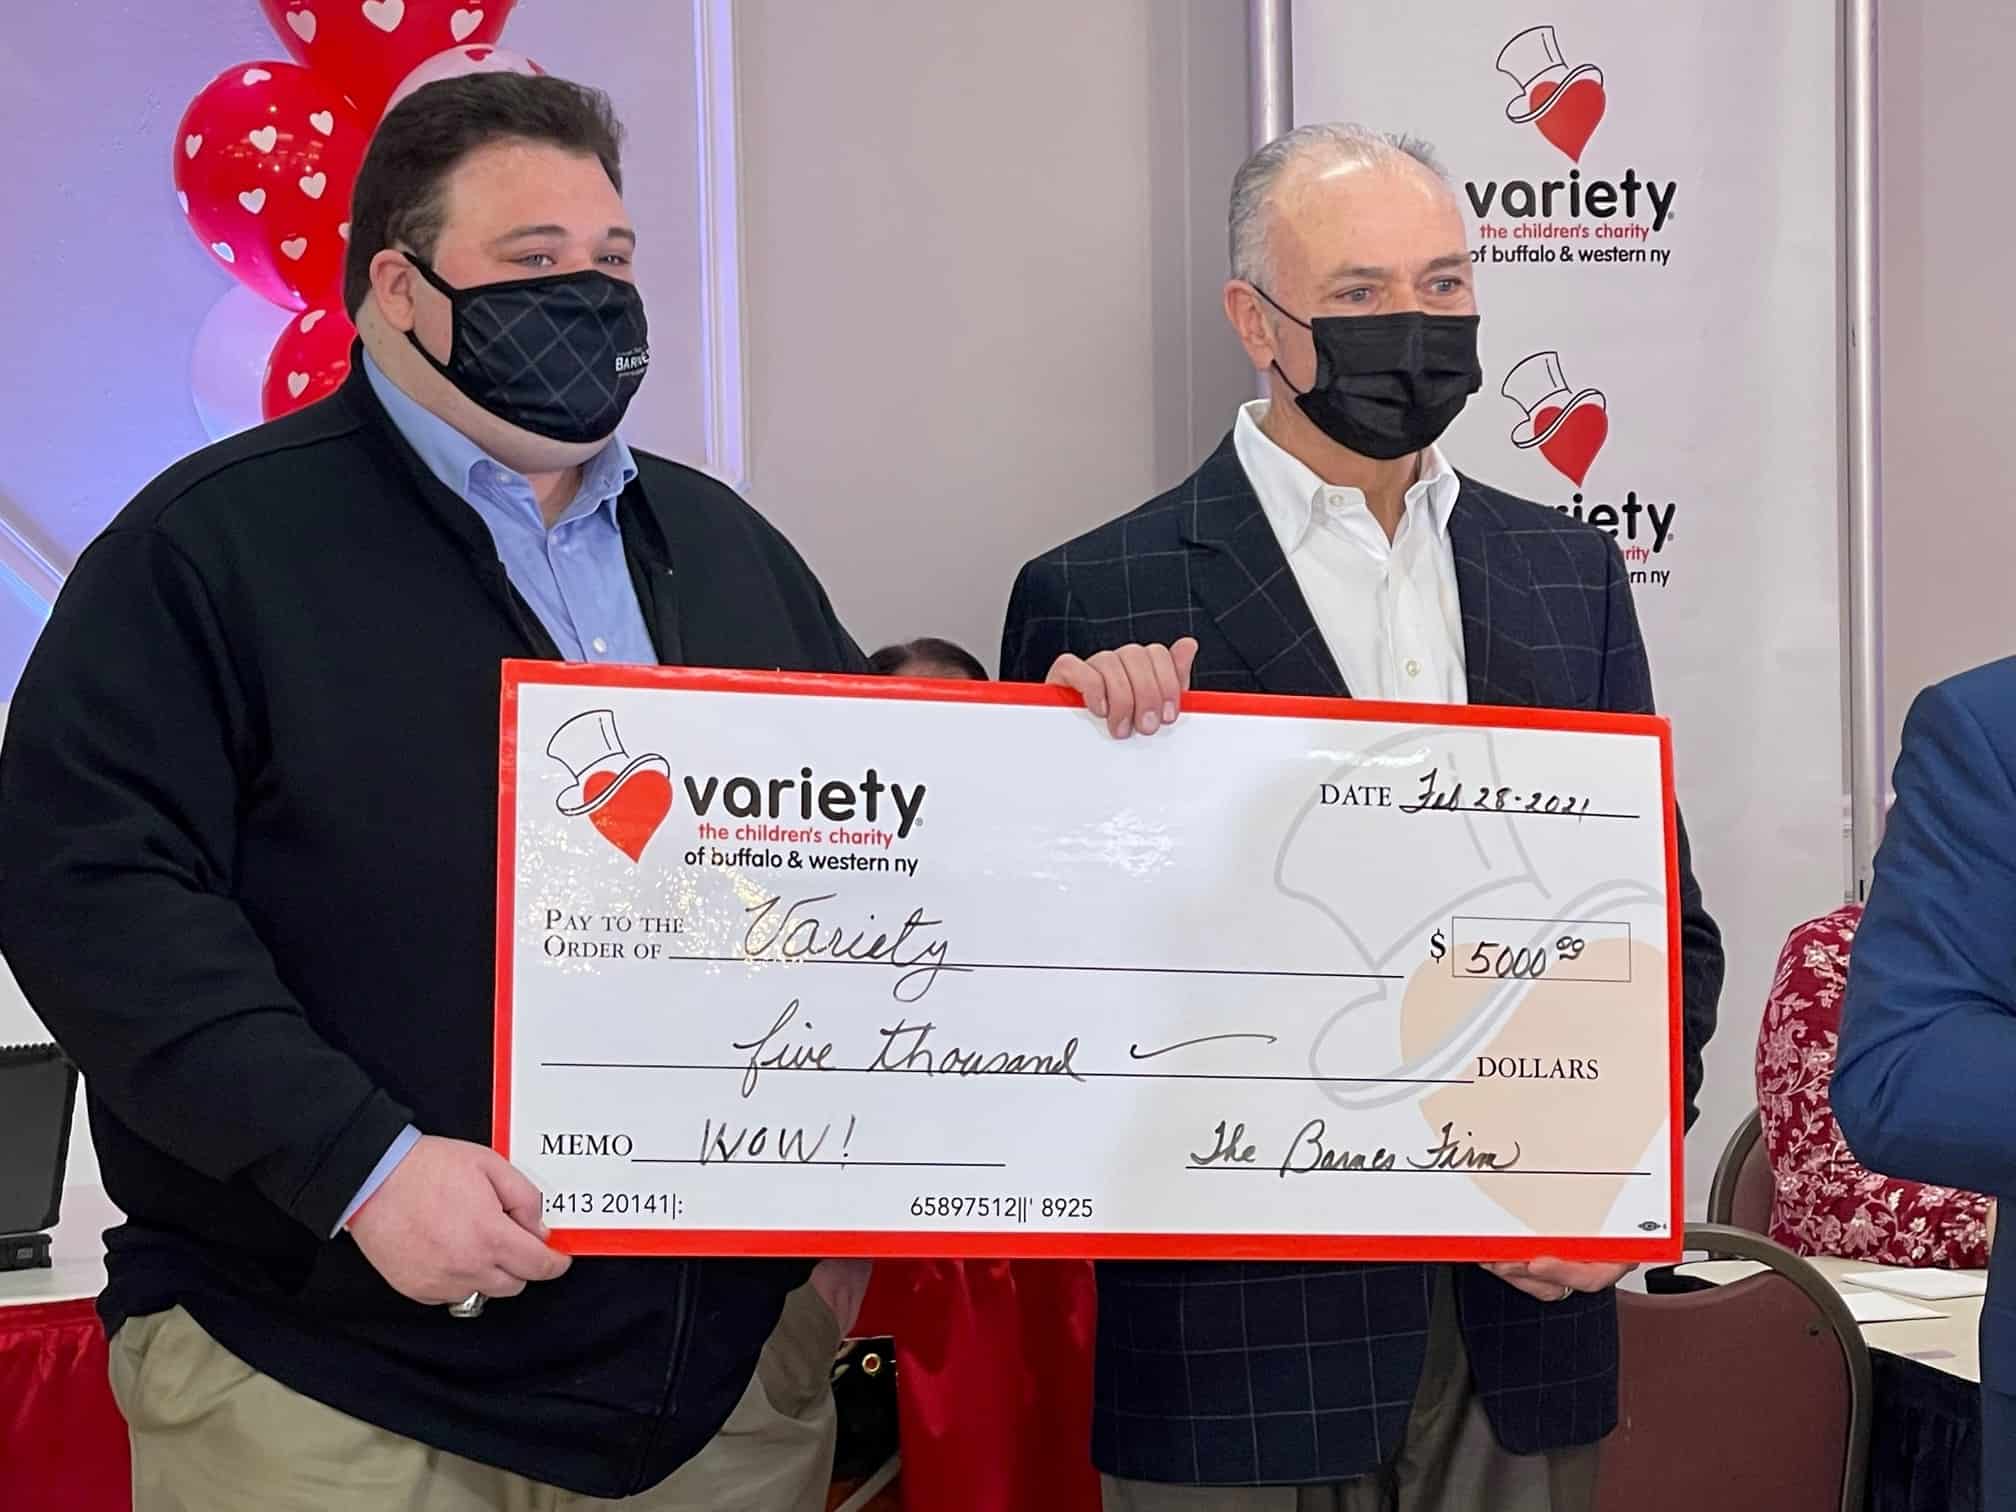 Rich Barnes handing off a $5000 check to variety, the children's charity of buffalo and western ny